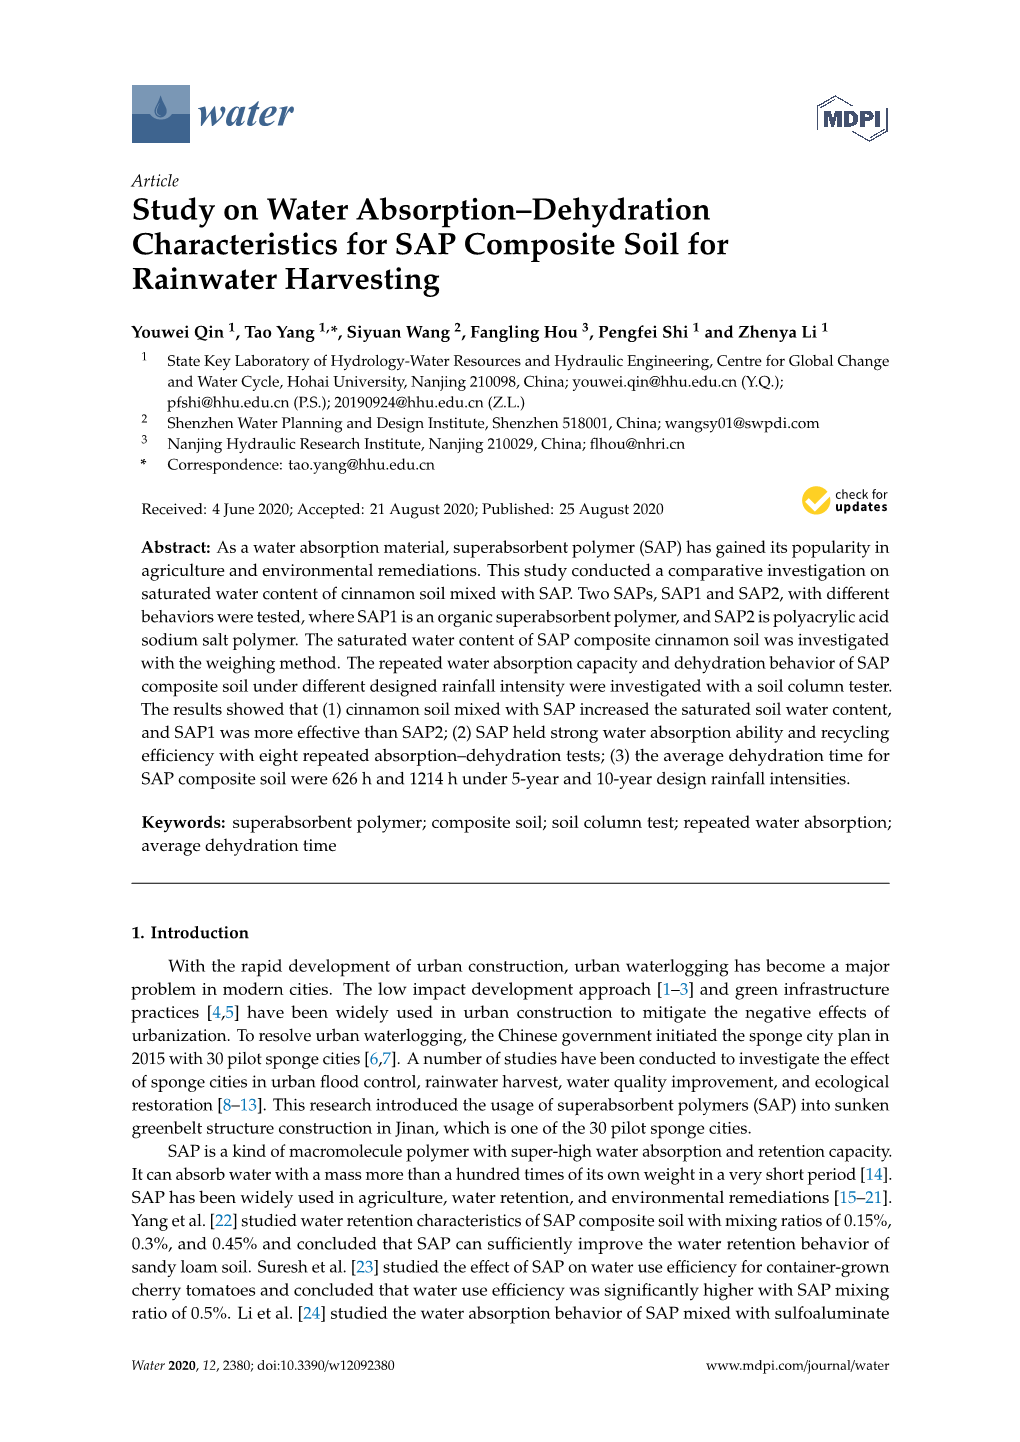 Study on Water Absorption–Dehydration Characteristics for SAP Composite Soil for Rainwater Harvesting